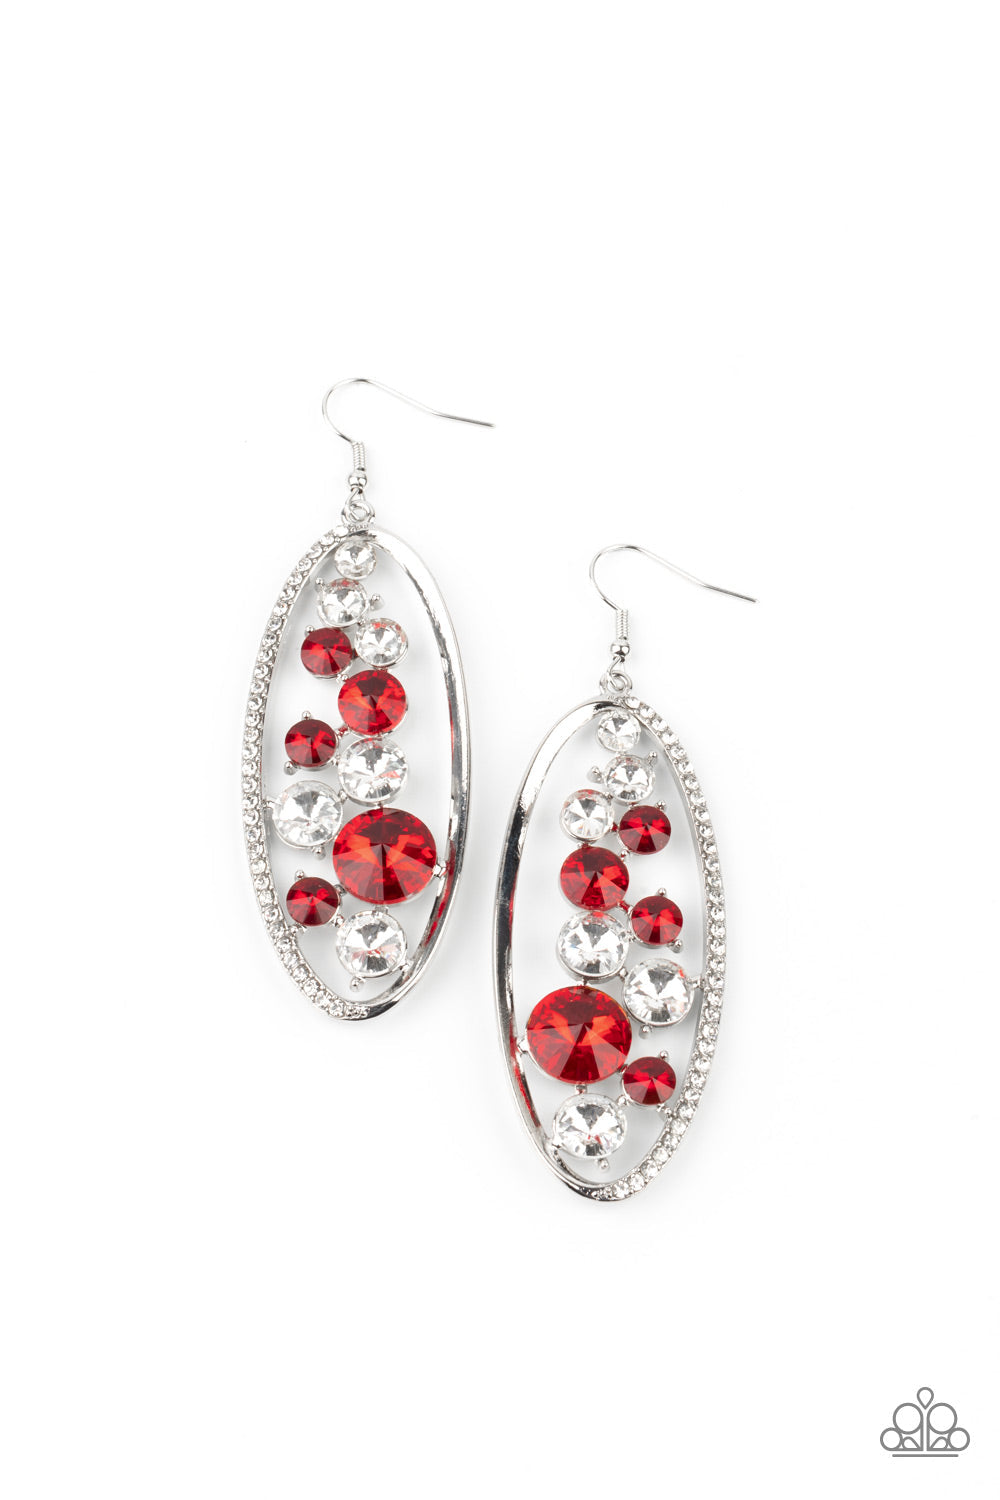 Rock Candy Bubbly - Red and Silver Sparkly Earrings - Paparazzi Accessories - Oversized collection of glassy white and glittery red rhinestones sparkle inside a silver oval frame. One side of the frame is encrusted in dainty white rhinestones, for a refined flair.